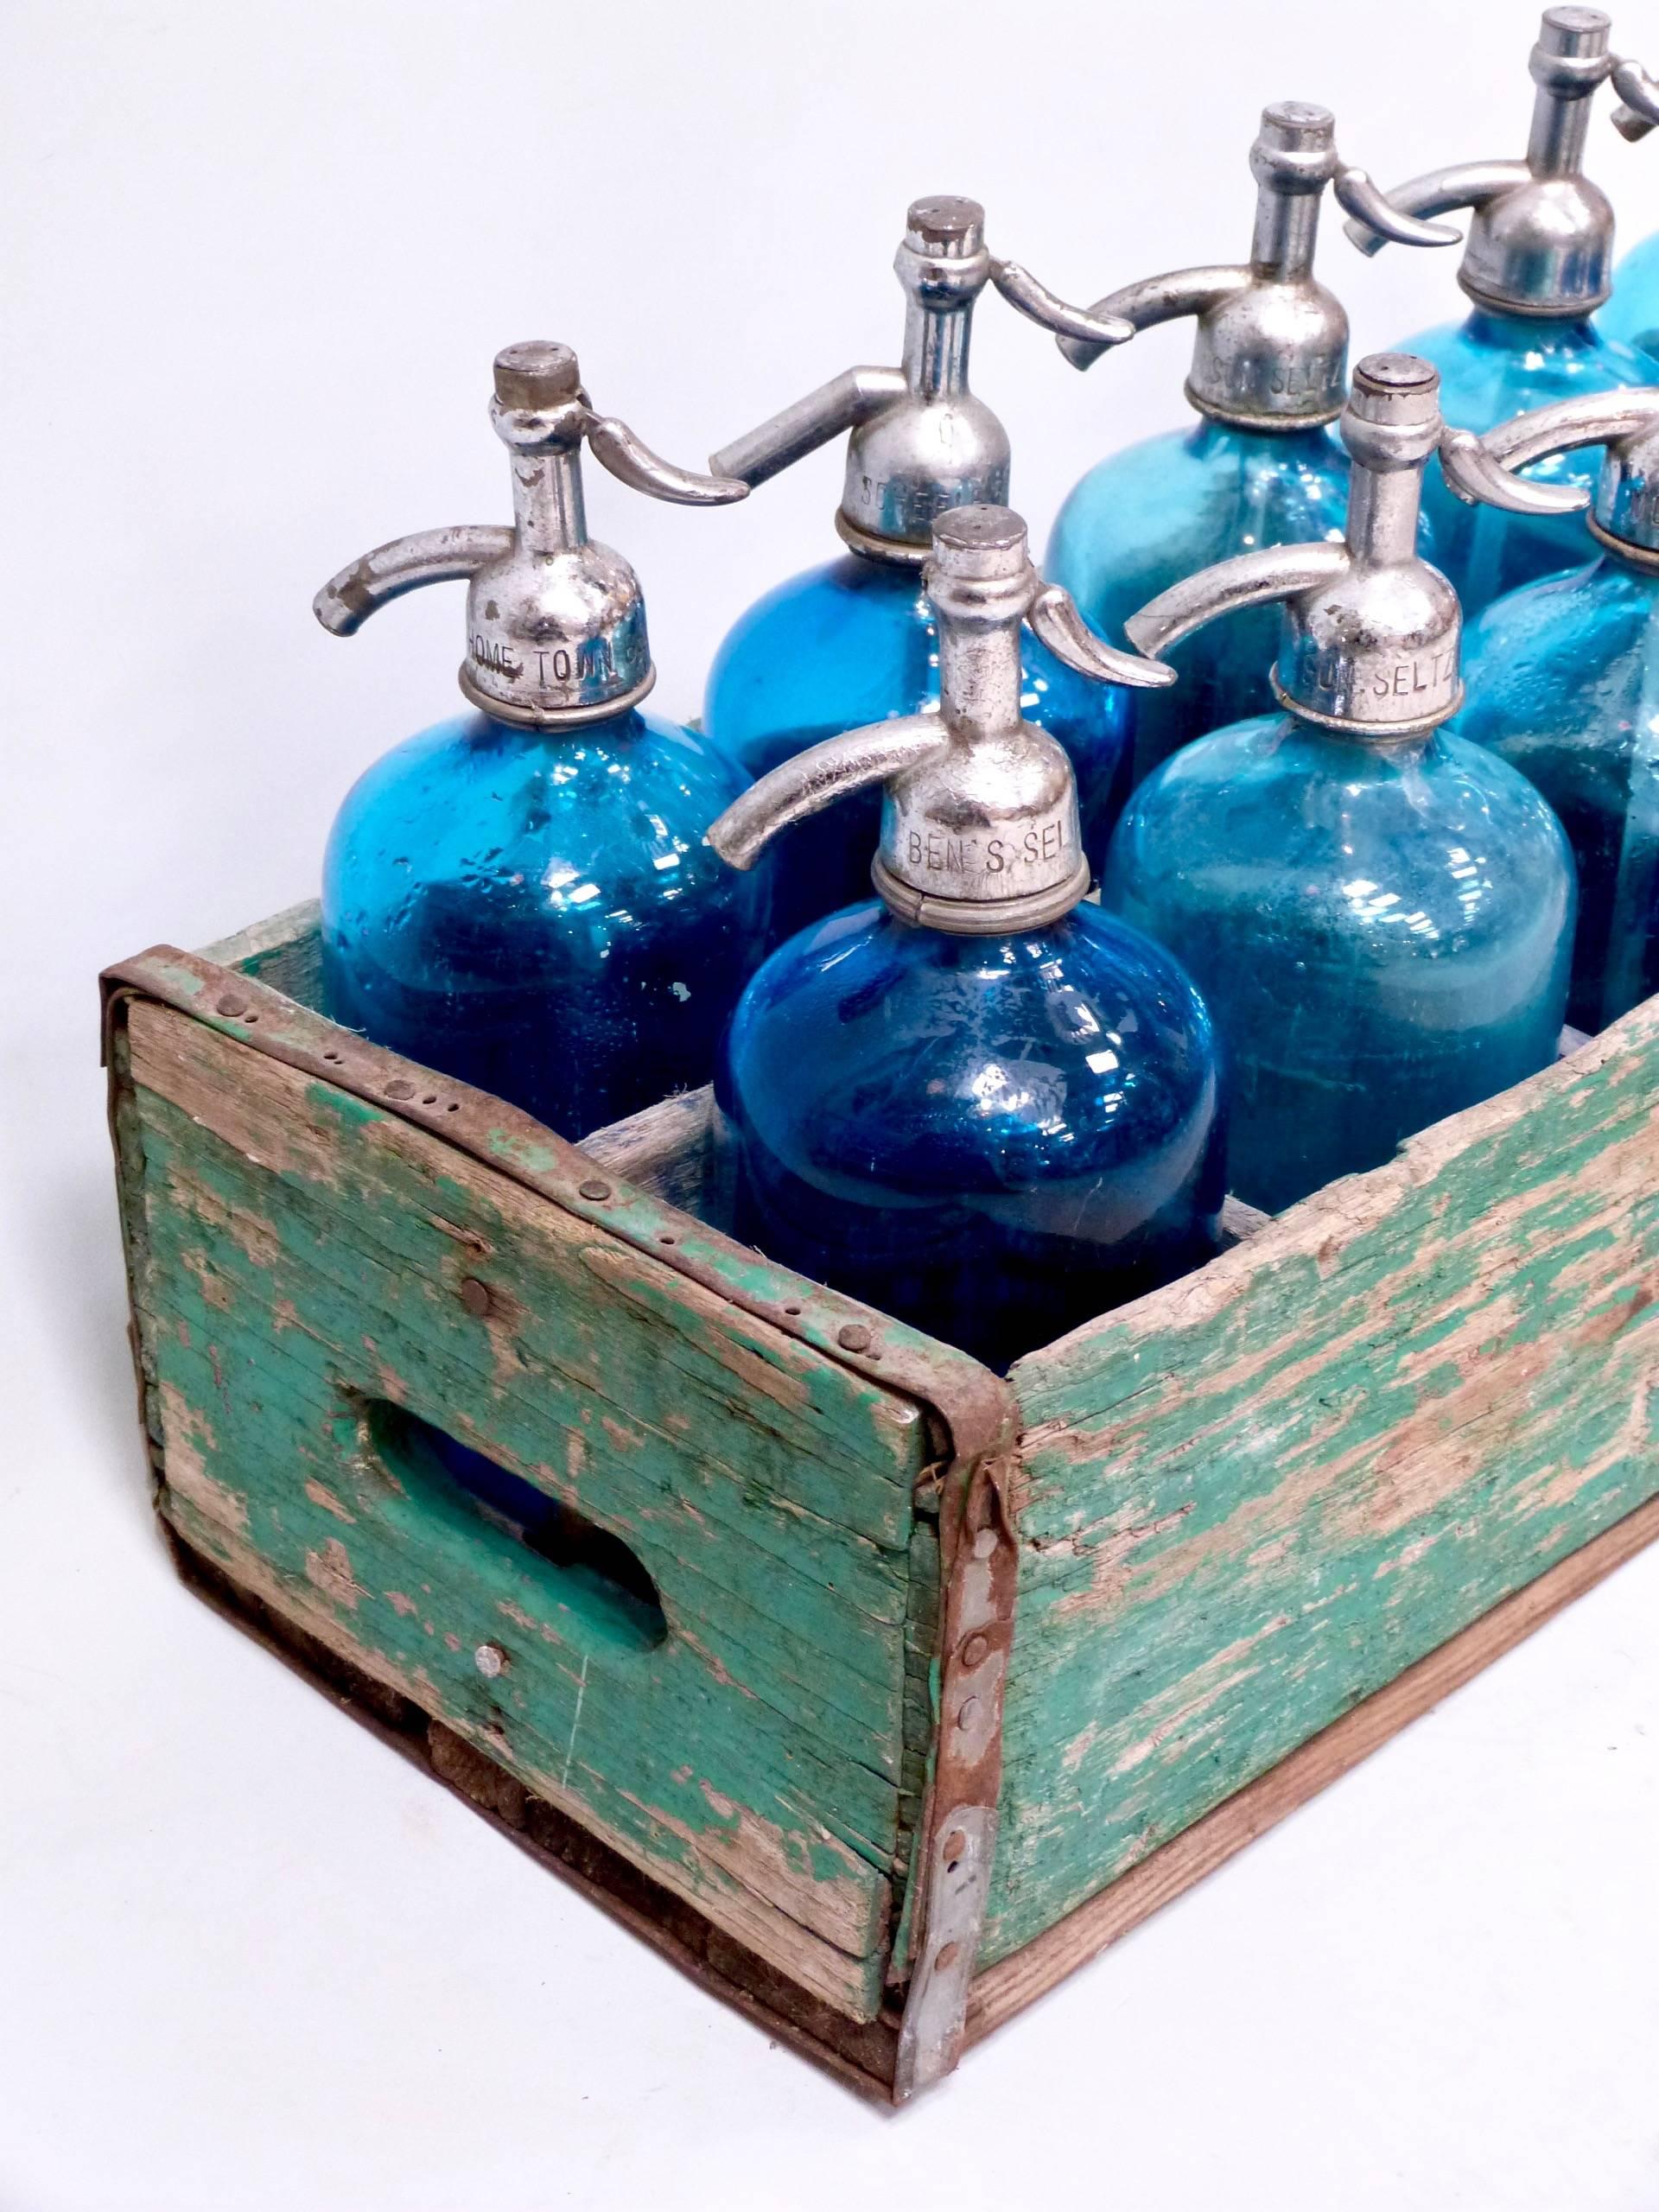 A collection of ten French 20th century antique blue seltzer siphon bottles, in a wooden crate, circa 1950.